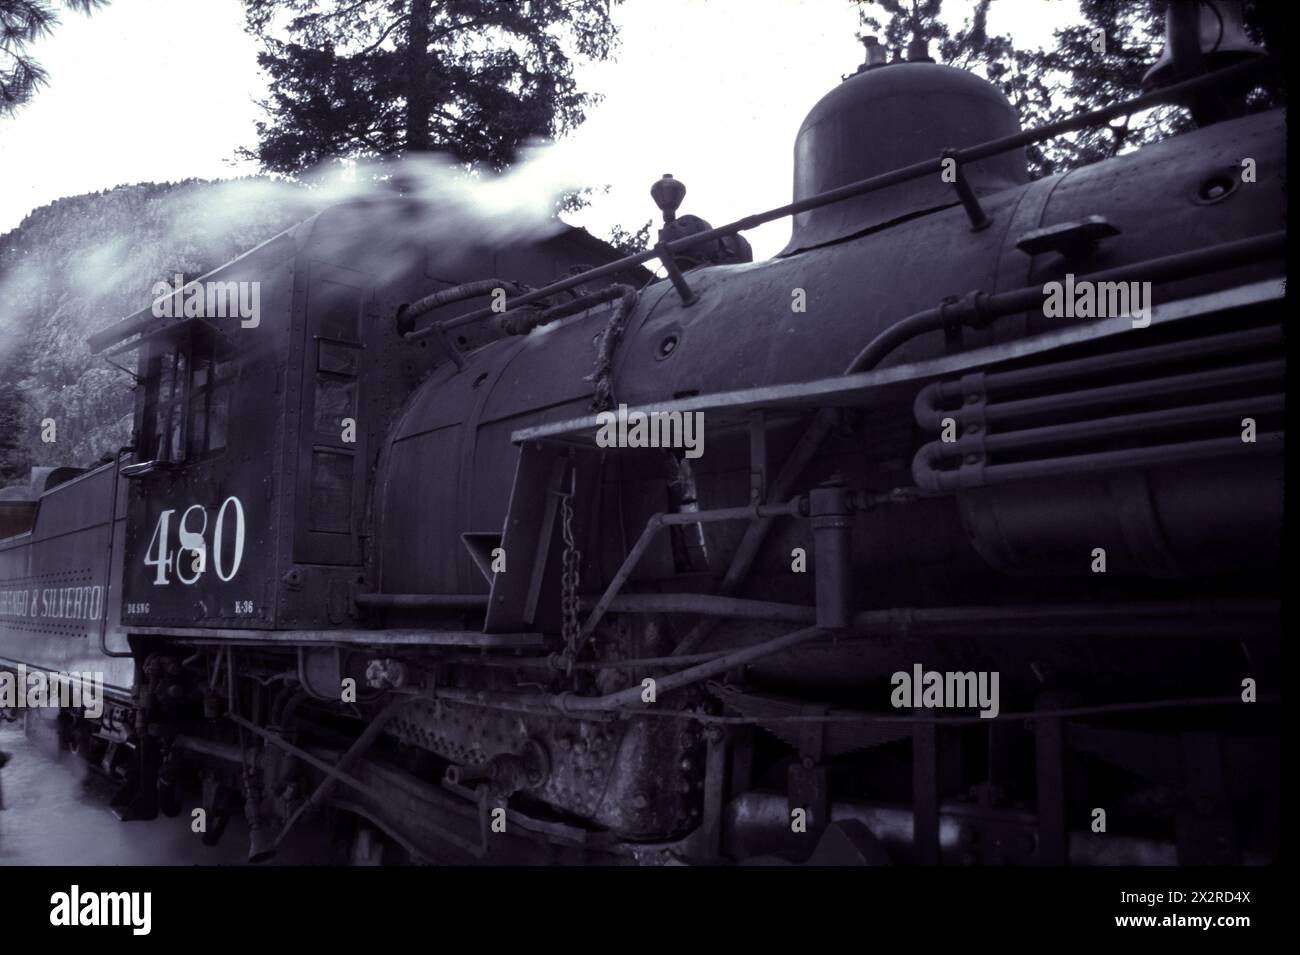 Working Durango & Silverton locomotive parked with steam in a mountain forest monochrome grade. Stock Photo